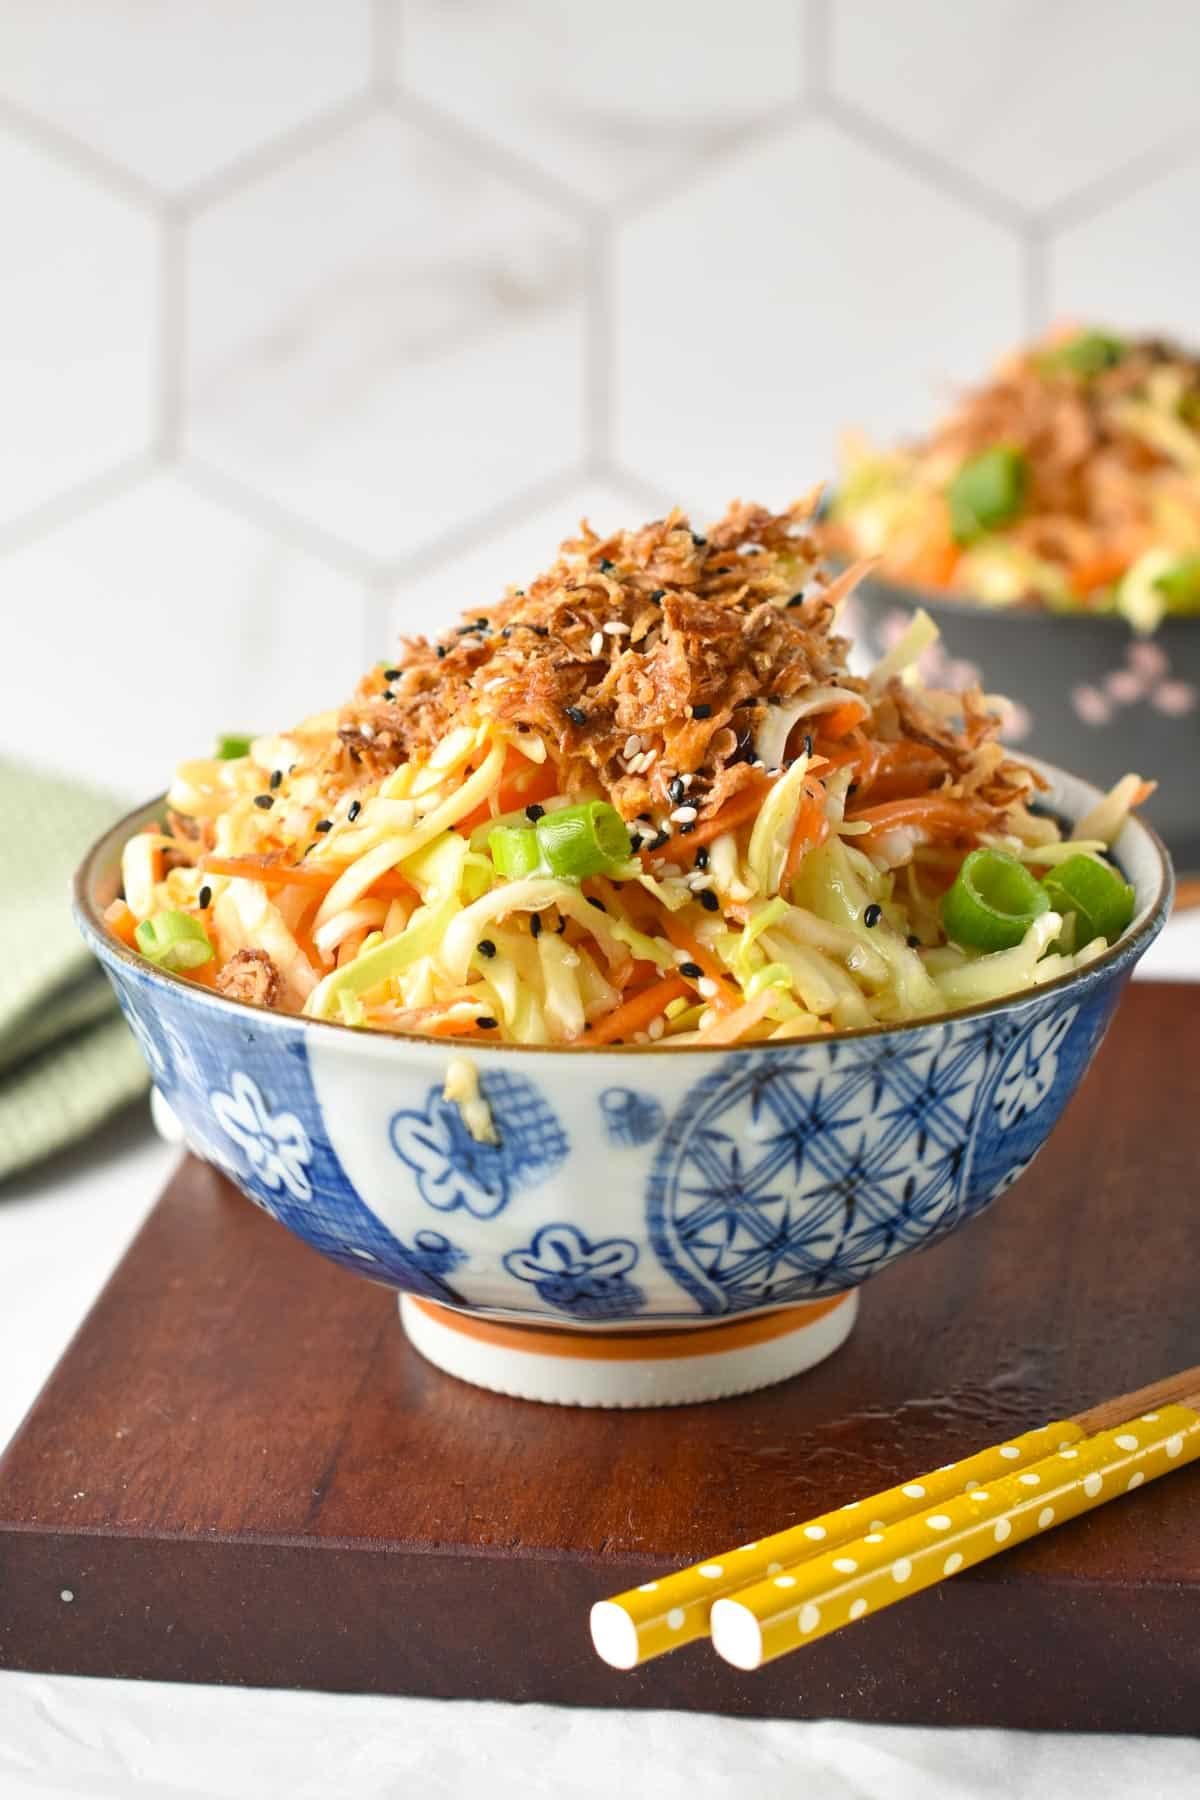 A bowl of Japanese cabbage salad topped with fried shallots on a wooden board with chopsticks.